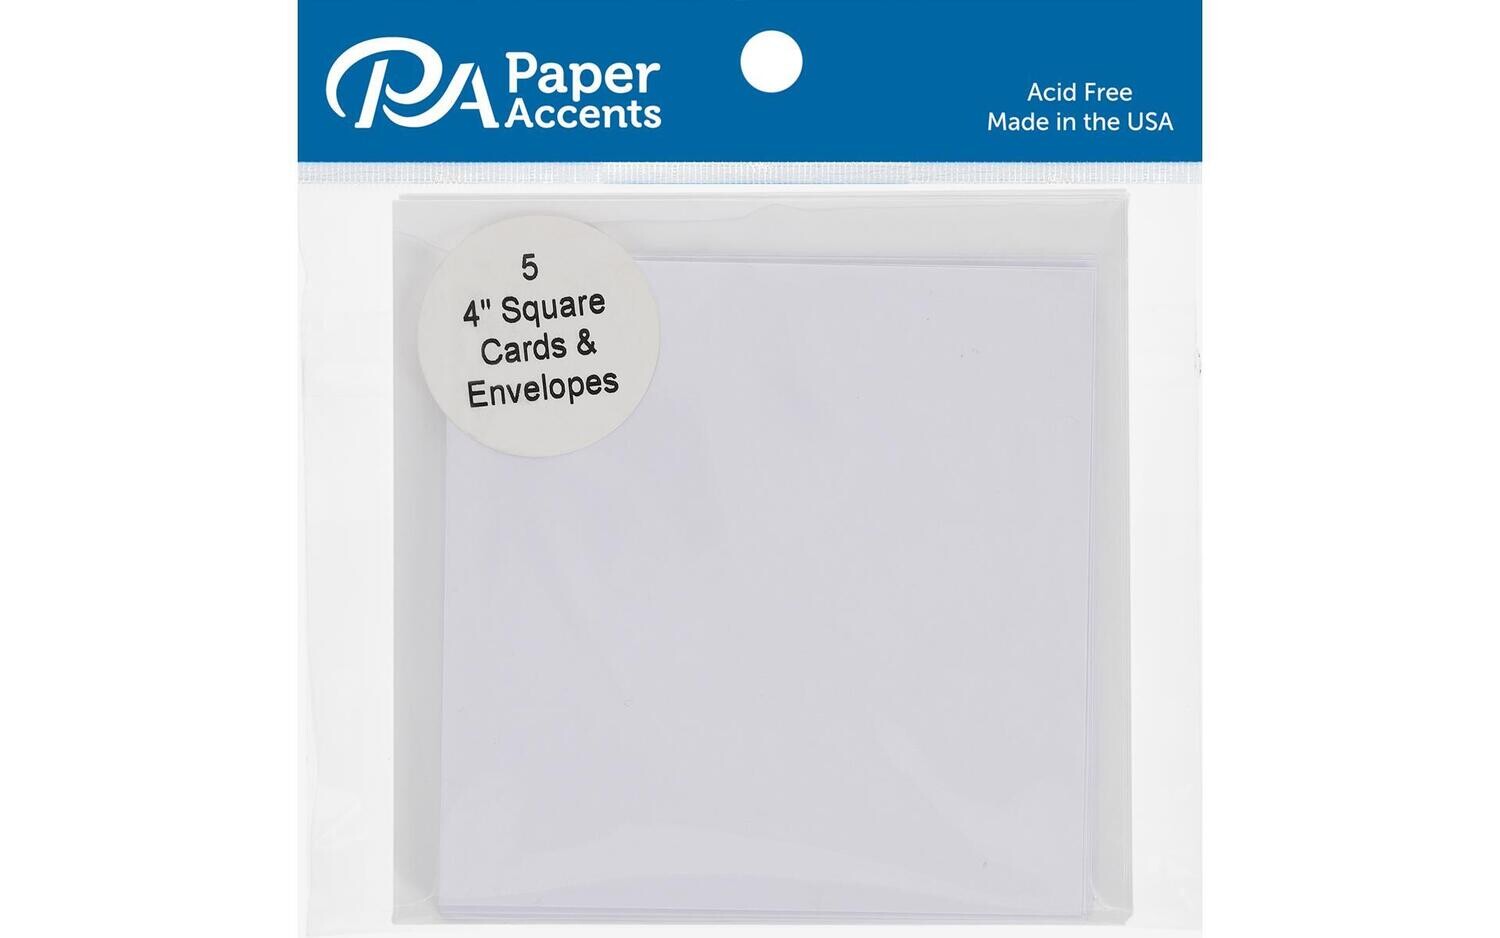 Paper Accents Card and Envelope Sets 4"x4" White